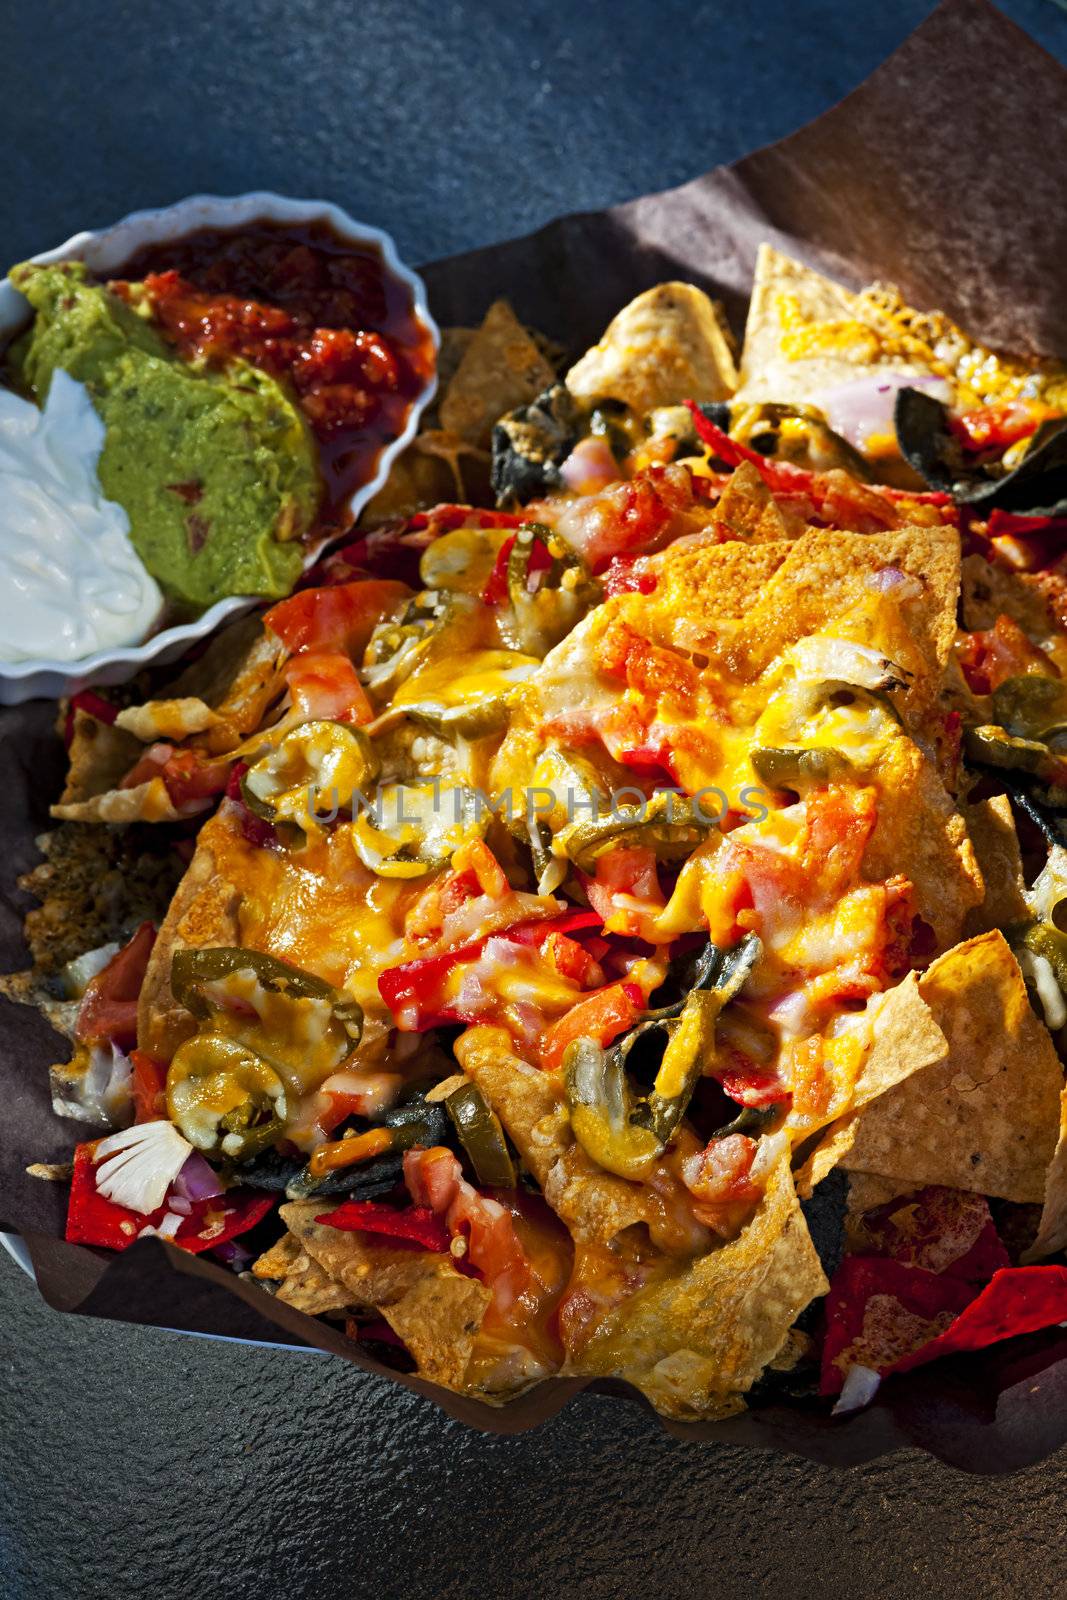 Basket of nachos with cheese jalapeno and toppings